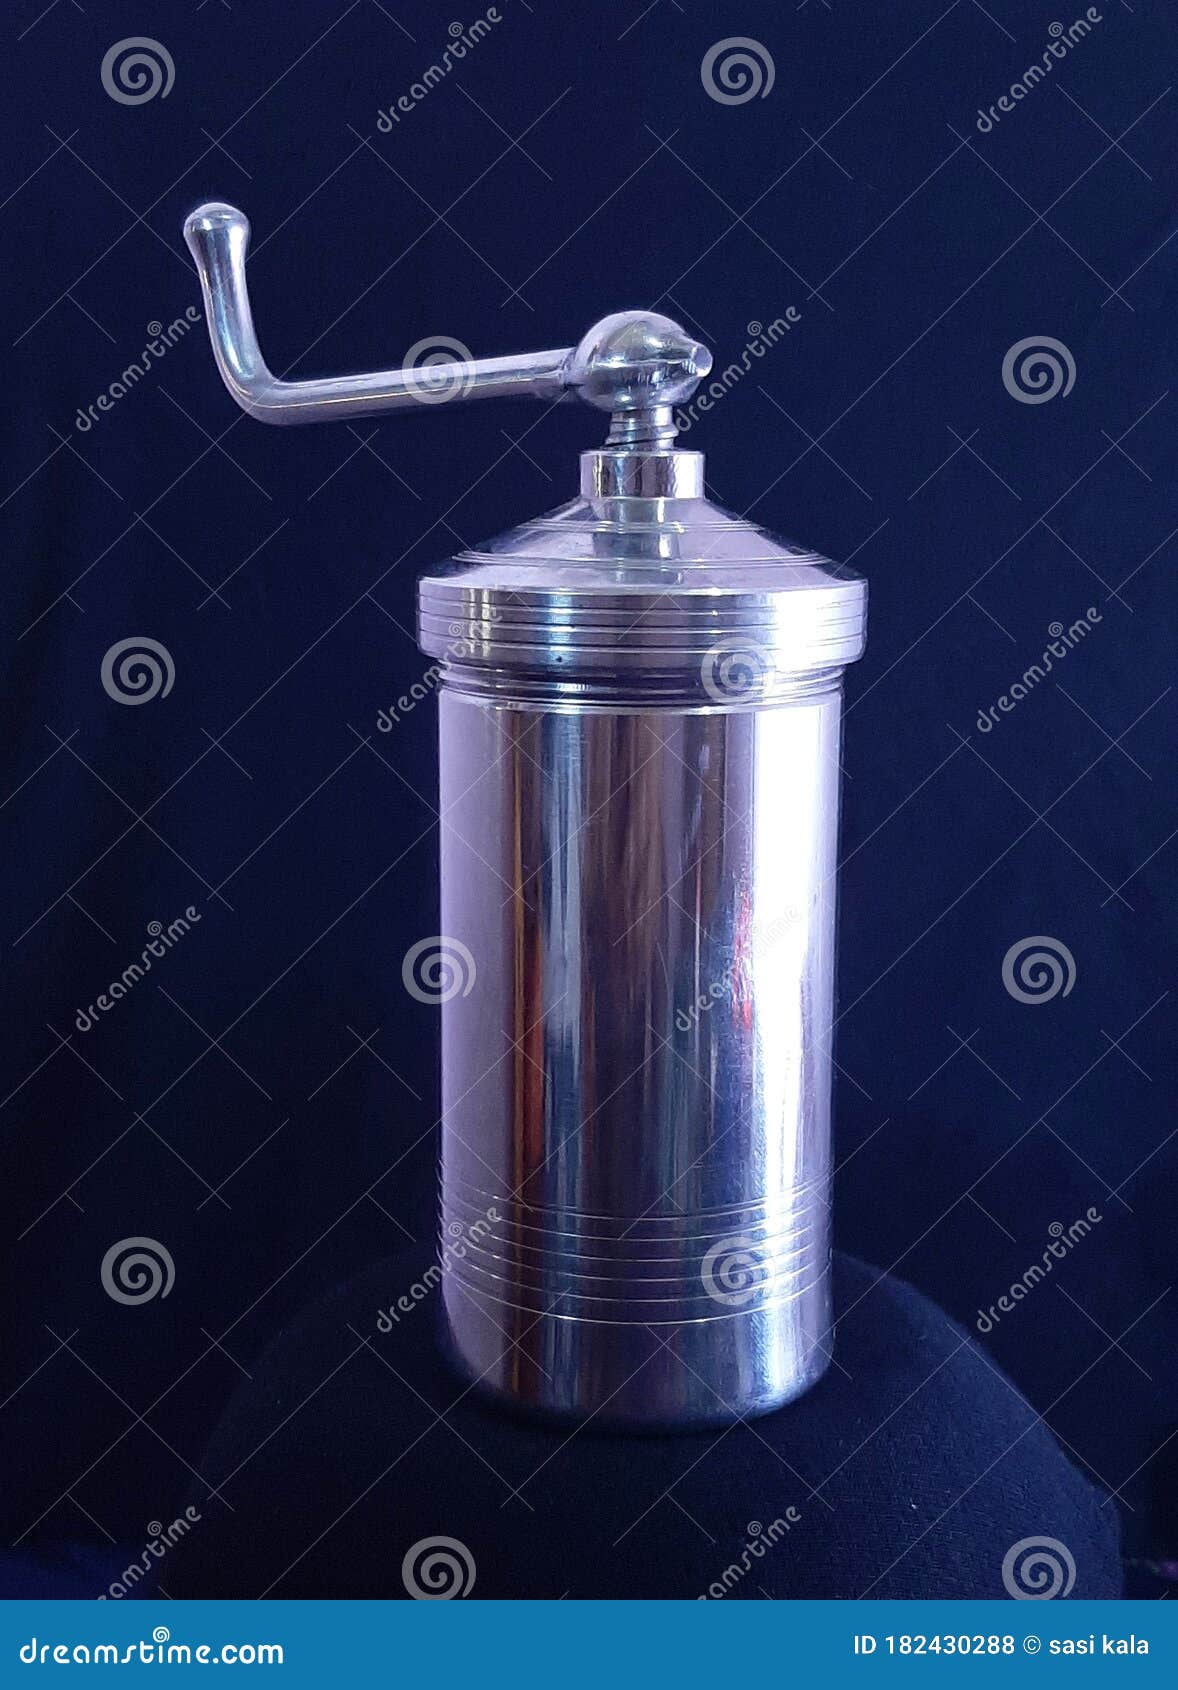 https://thumbs.dreamstime.com/z/stainless-steel-idiyappam-maker-use-kitchen-toolsnkerala-favourite-food-items-maker-stainless-steel-idiyappam-maker-use-182430288.jpg